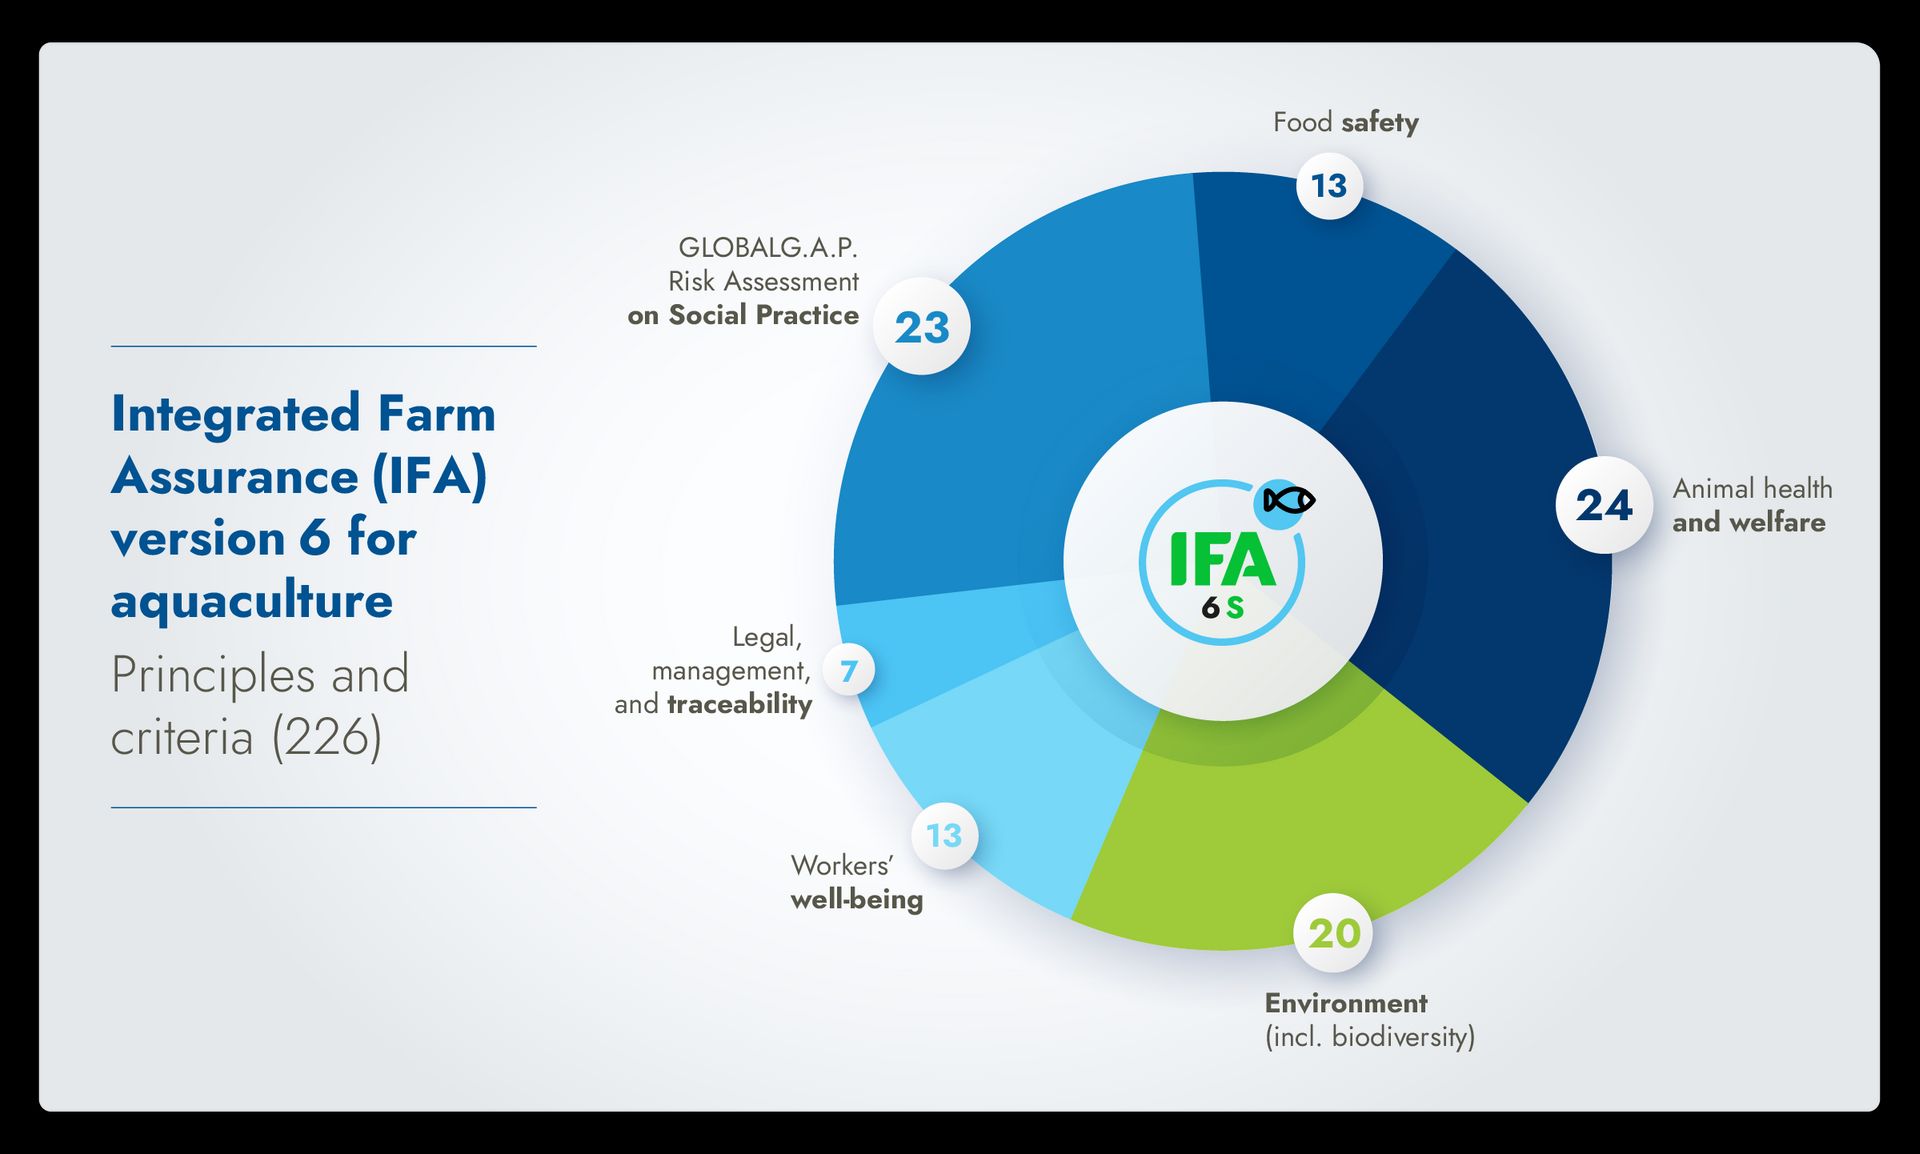 Infographic showing the principles and criteria of Integrated Farm Assurance version 6 for aquaculture